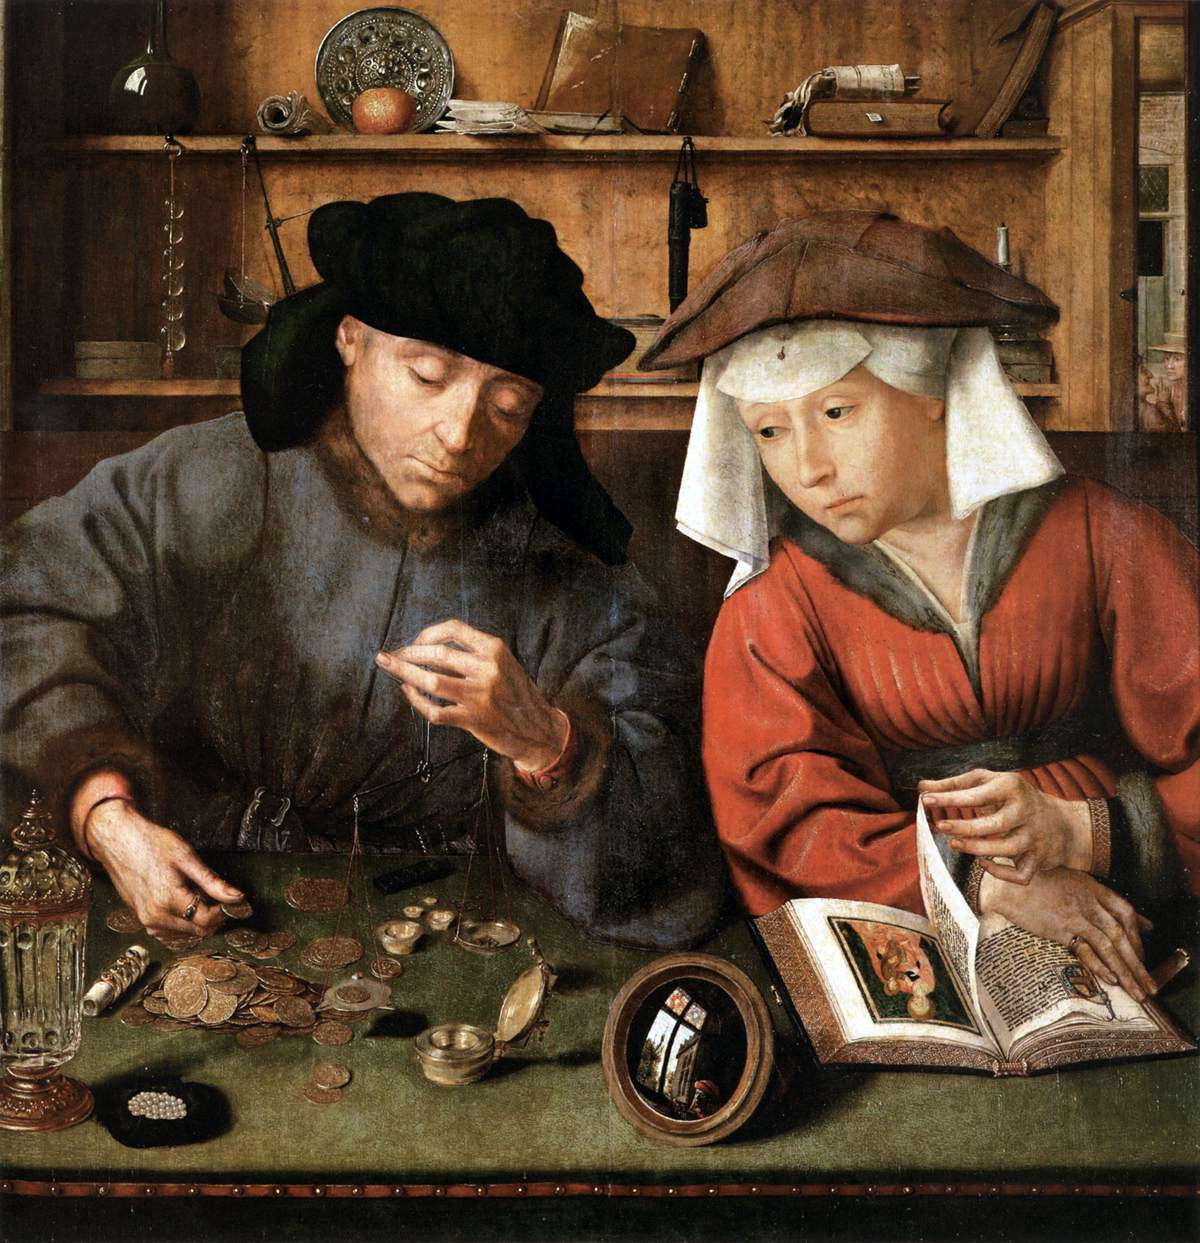 Nickle at Noon – The Birth of Banking: Money and Art in Renaissance Europe